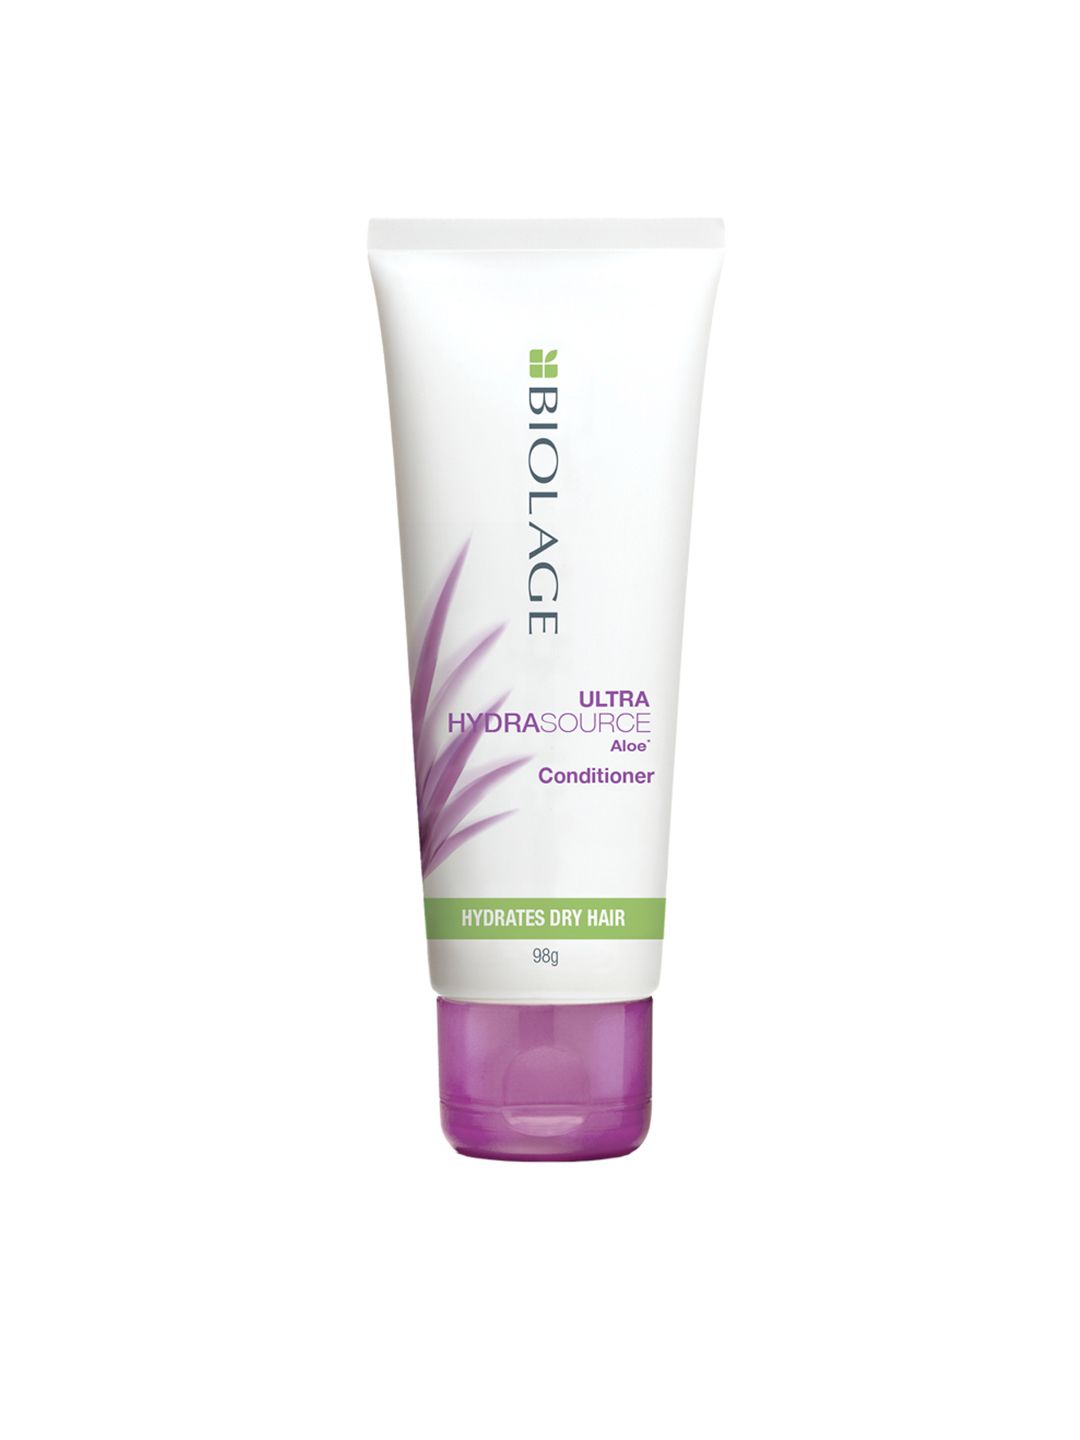 Biolage Ultra Hydra Source Aloe Conditioner for Hydration - 98 g Price in India